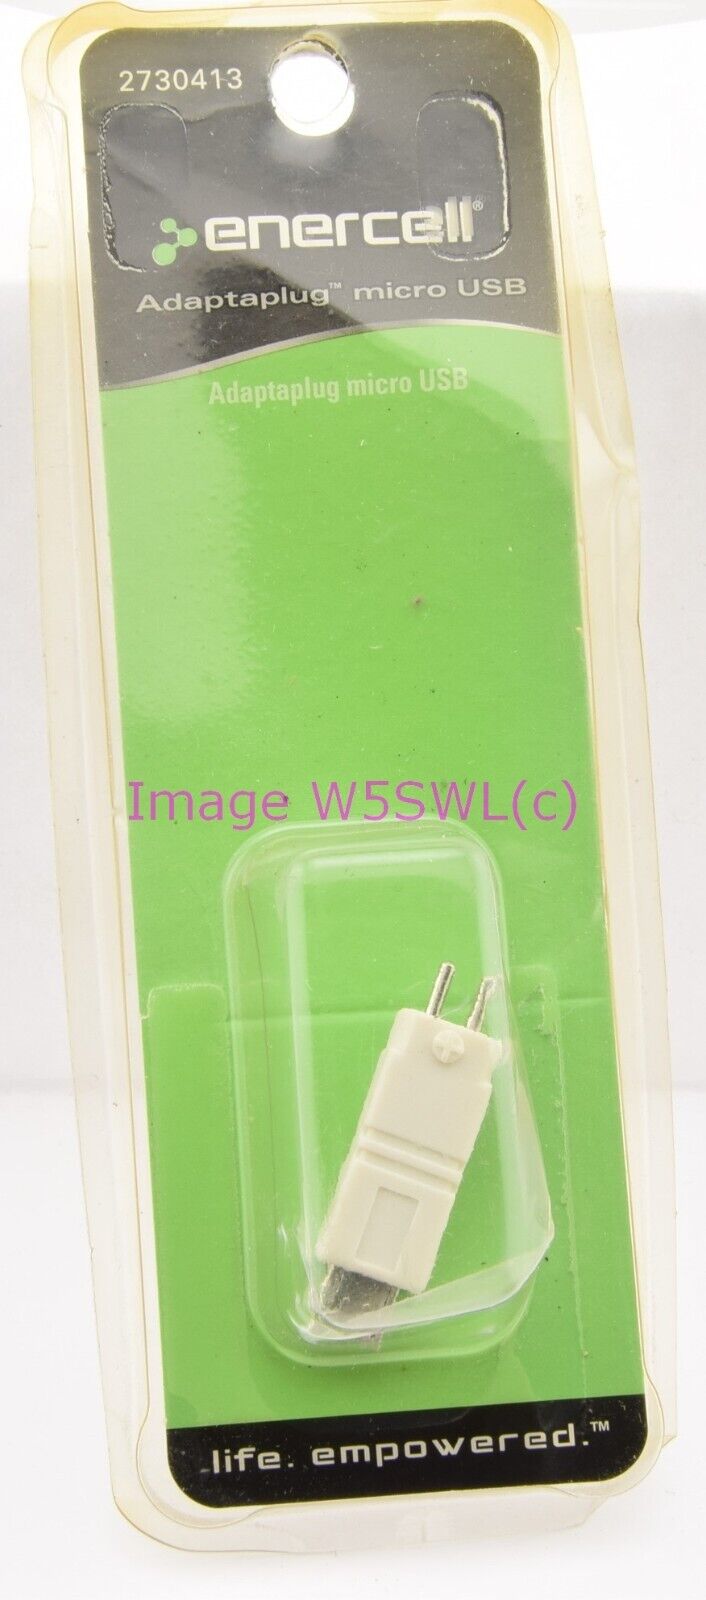 Enercell Adaptaplug Micro USB 2730413 - Dave's Hobby Shop by W5SWL